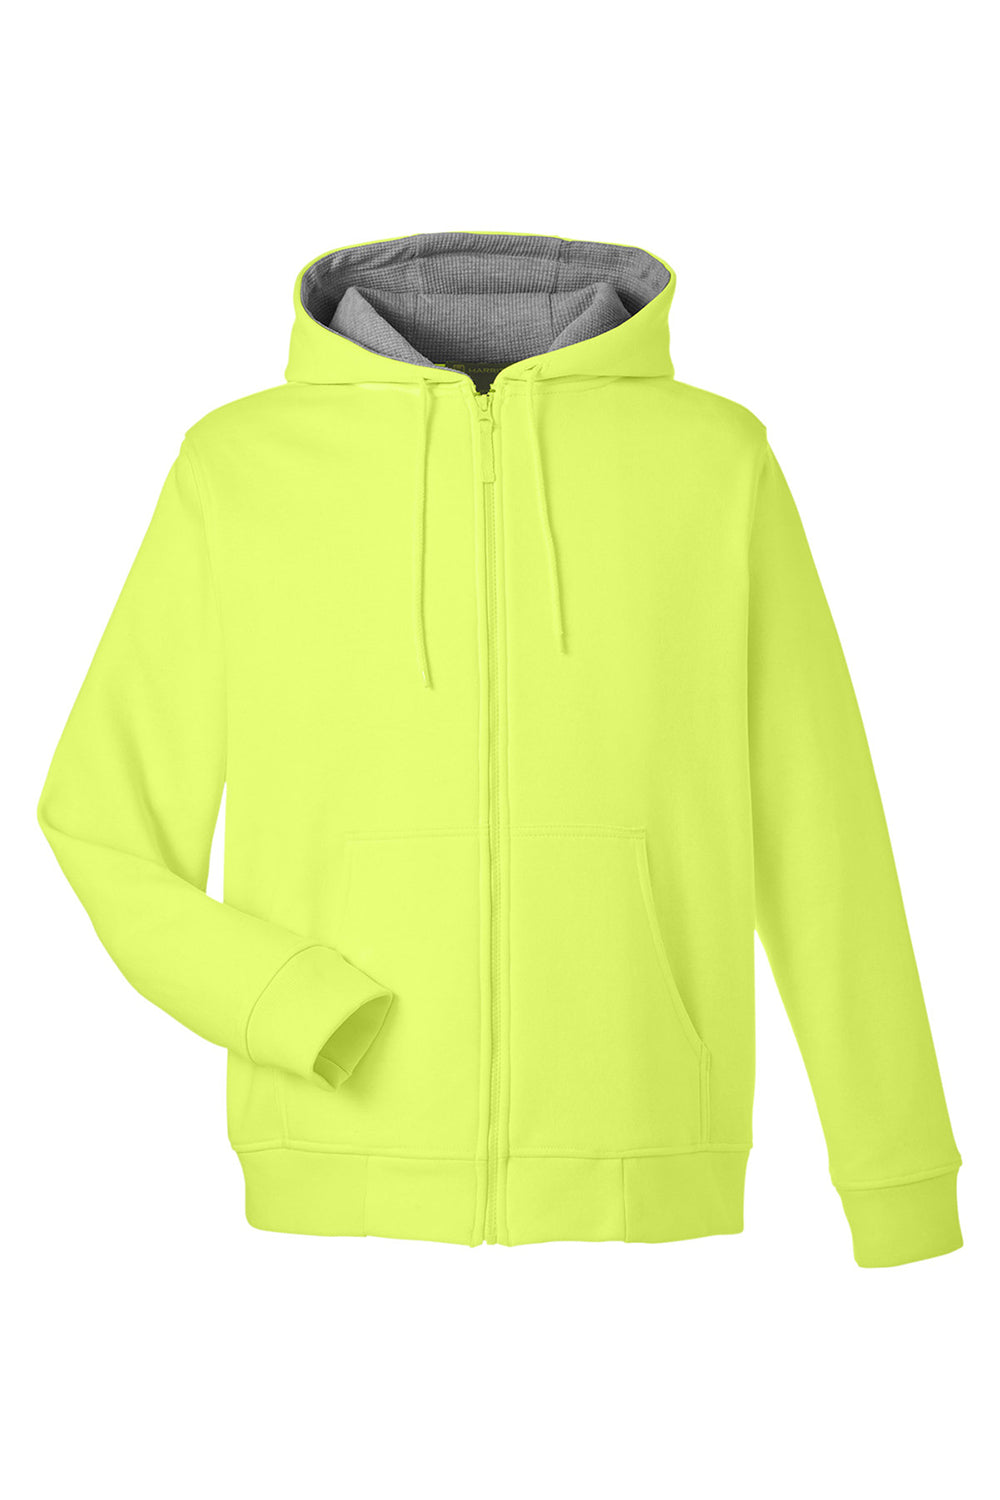 Harriton M711/M711T Mens Climabloc Full Zip Hooded Sweatshirt Hoodie Safety Yellow Flat Front